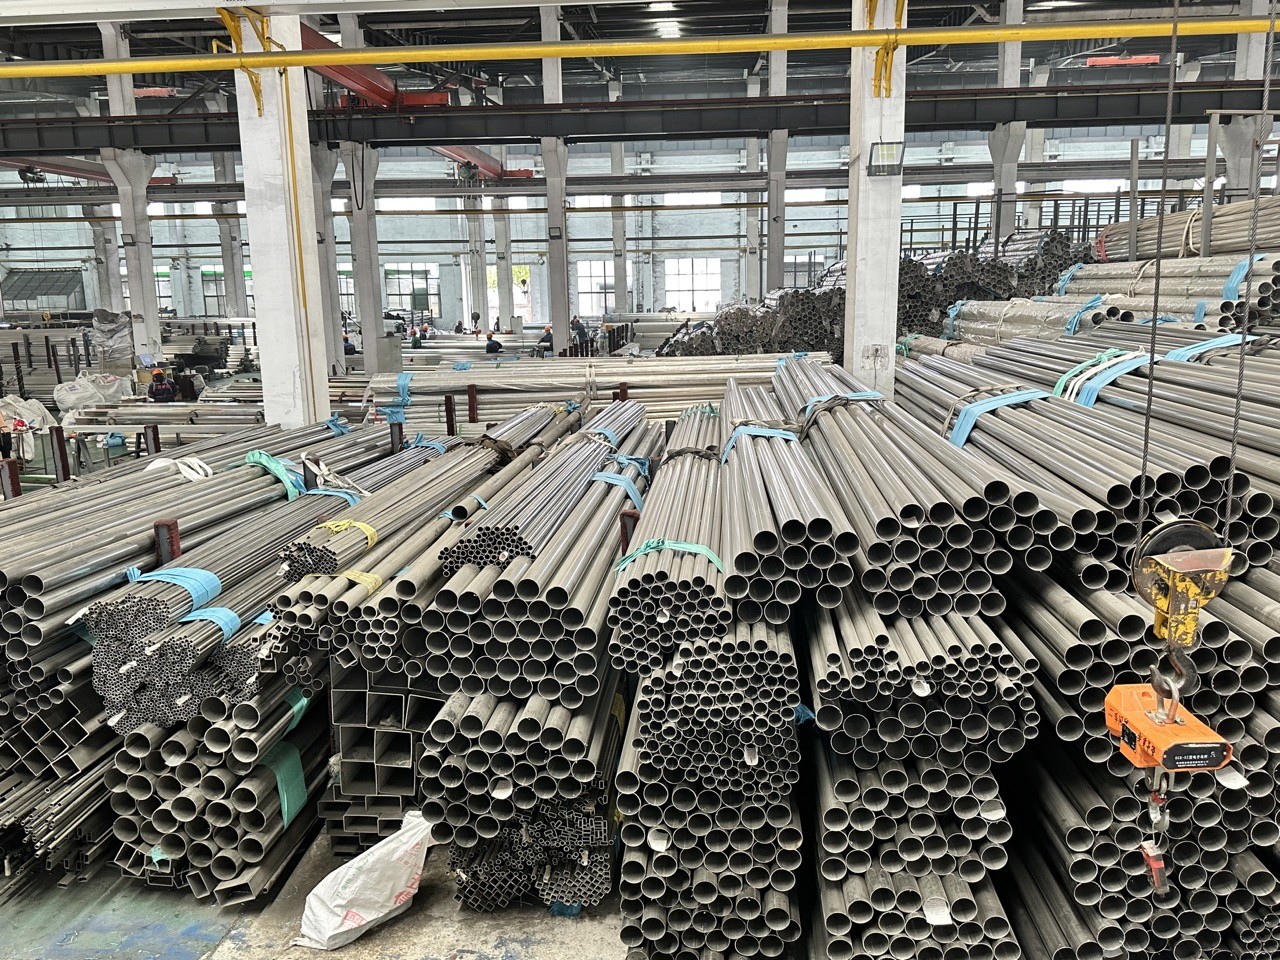 Corrosion Resistant Stainless Steel Pipe